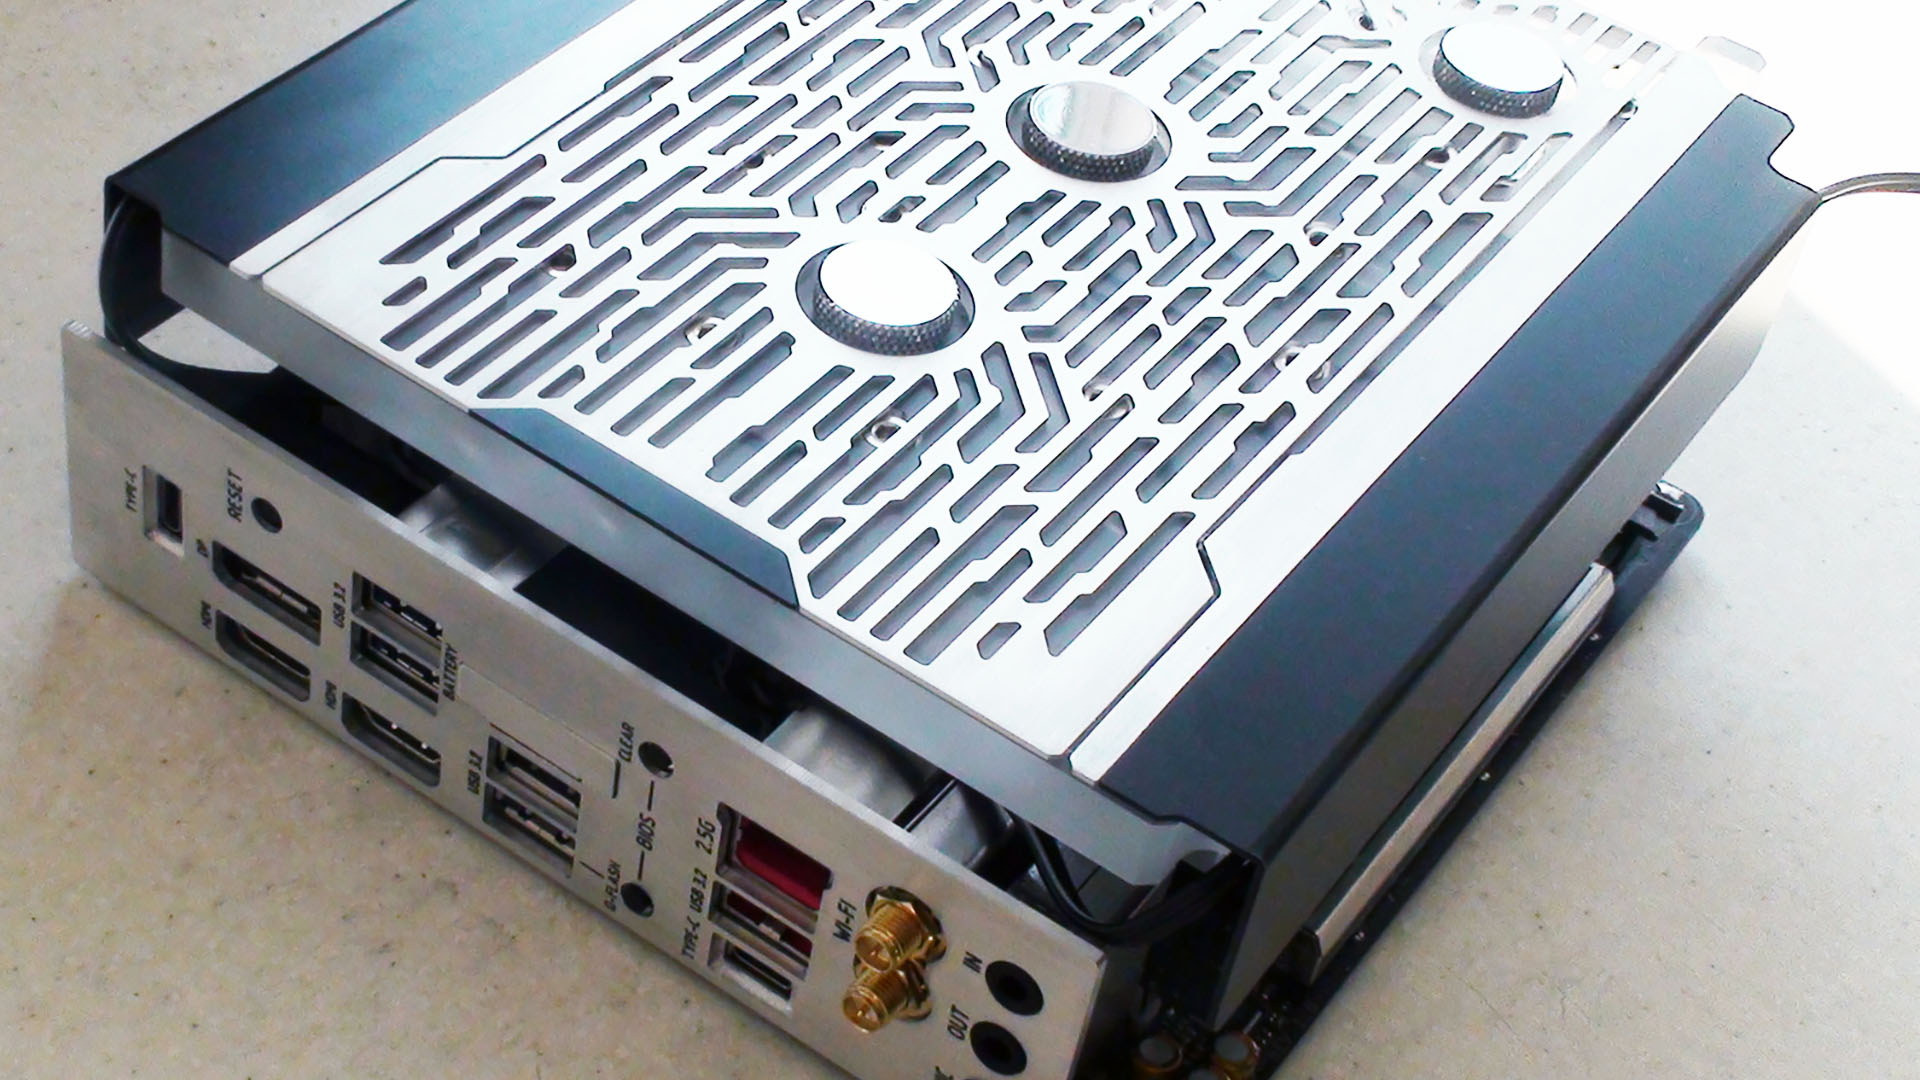 This symmetrical gaming PC was made with a handmade CNC machine